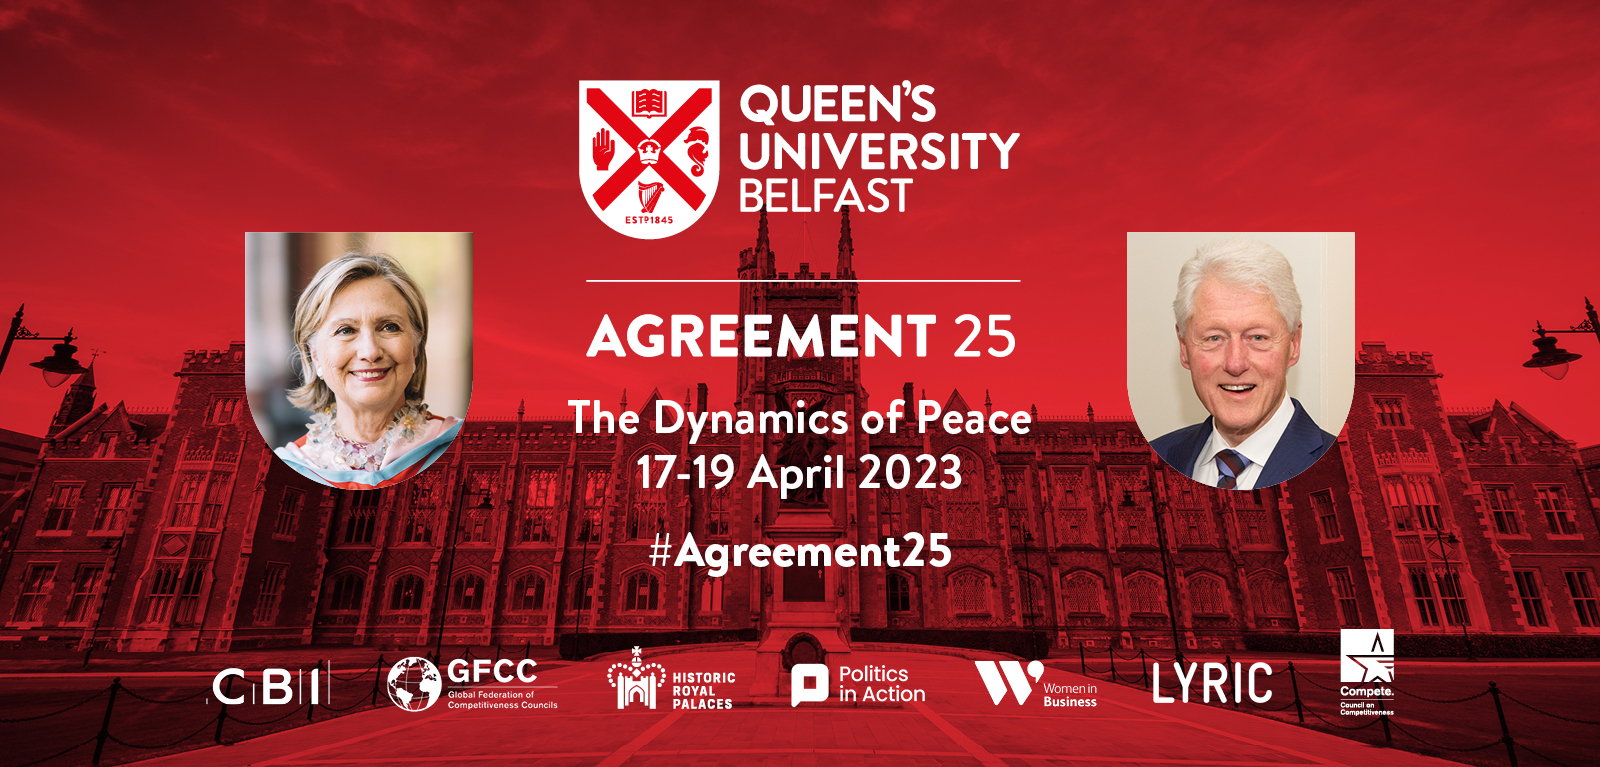 Queen’s University Belfast: Secretary Hillary R. Clinton to host President Clinton and other global leaders at Agreement 25